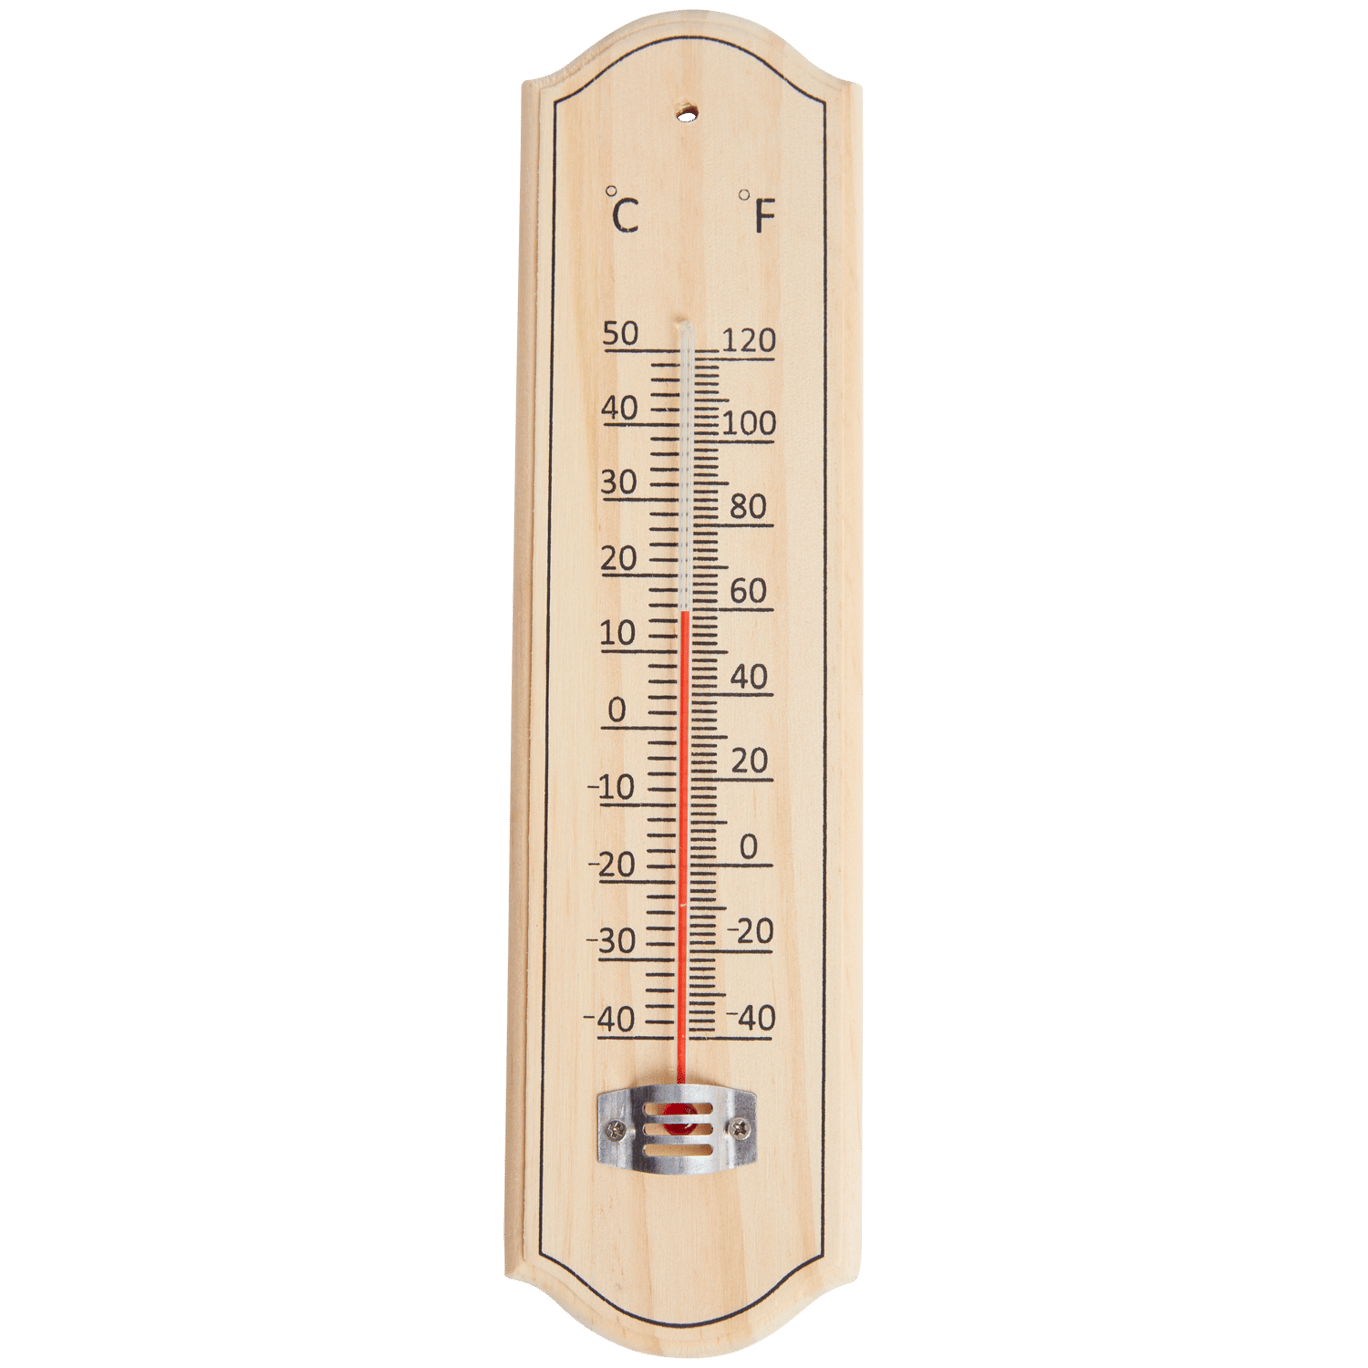 Home Accents thermometer